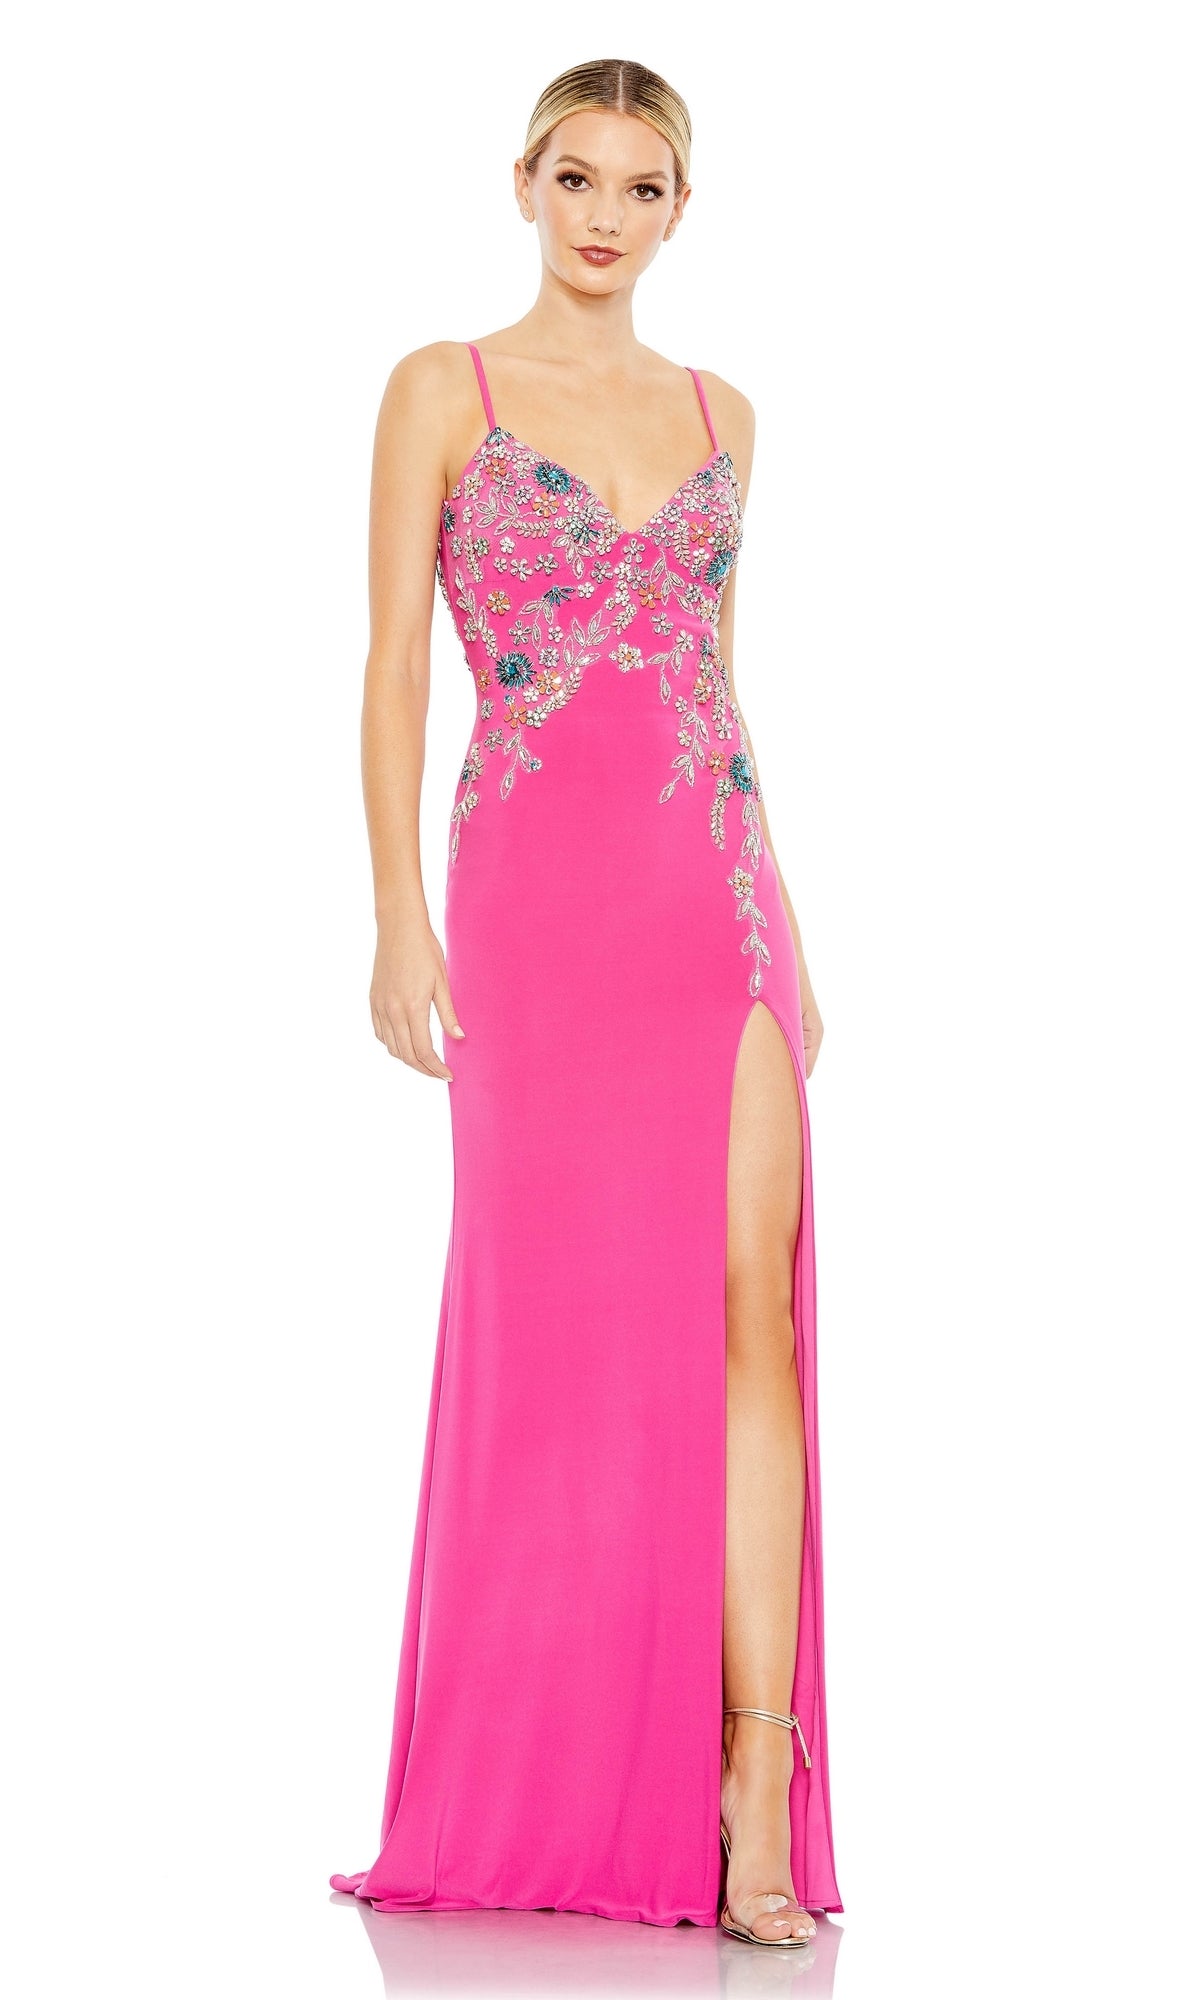 Long Pink Beaded Prom Dress with Low Back - PromGirl